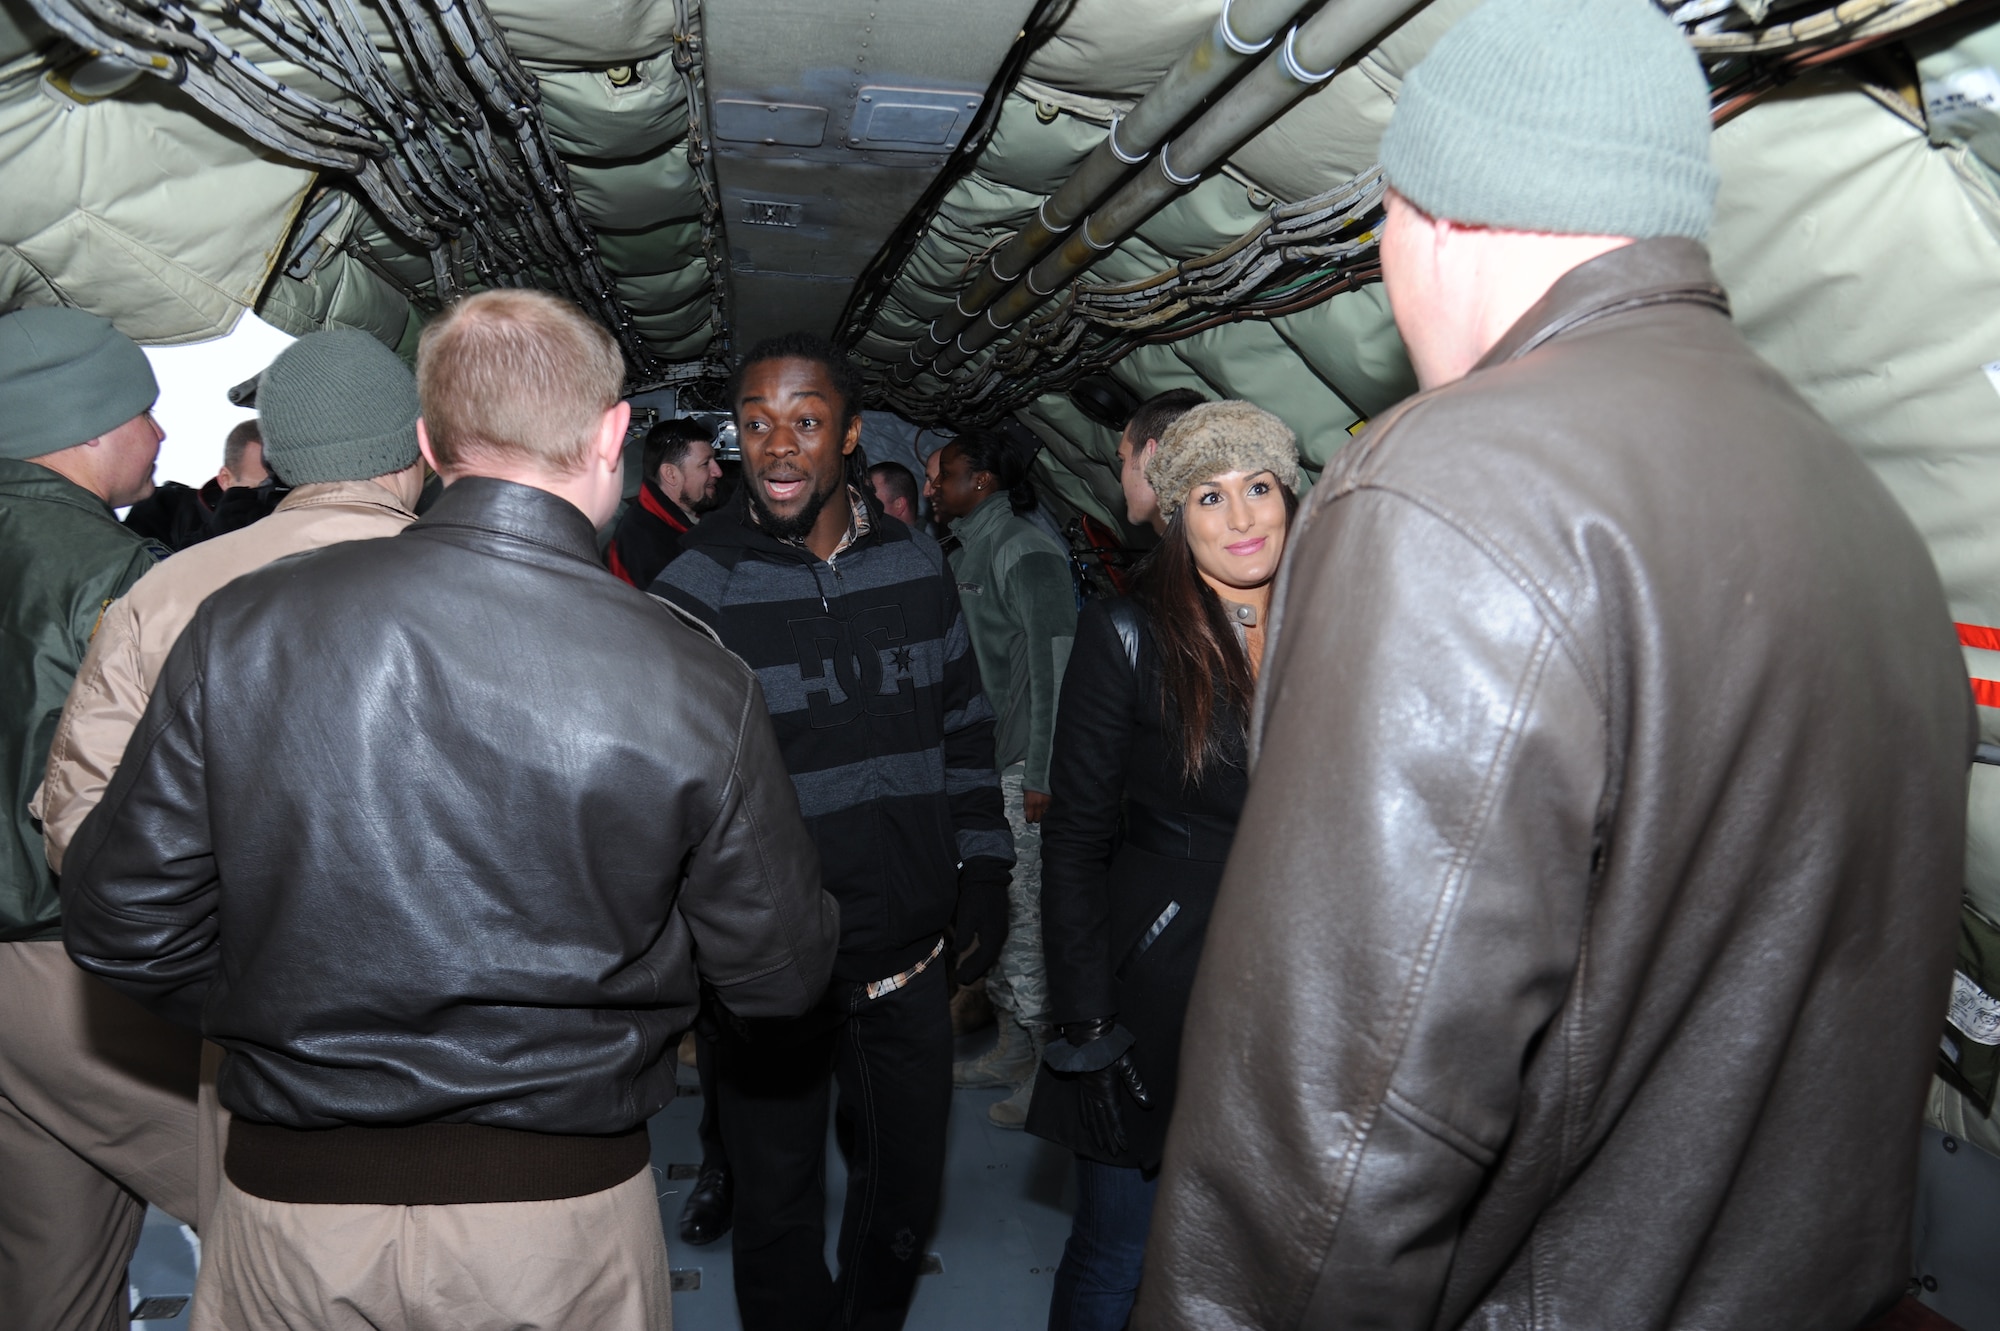 Kofi Kingston, World Wrestling Entertainment wrestler, (left) and Nikki Bella, WWE diva, greet service members while touring a KC-135 Stratotanker at the Transit Center at Manas, Kyrgyzstan, Dec. 2. Armed Forces Entertainment hosts more than 1,200 shows around the world each year, reaching more than 500,000 personnel at 270 military installations. (U.S. Air Force photo/Tech. Sgt. Hank Hoegen)